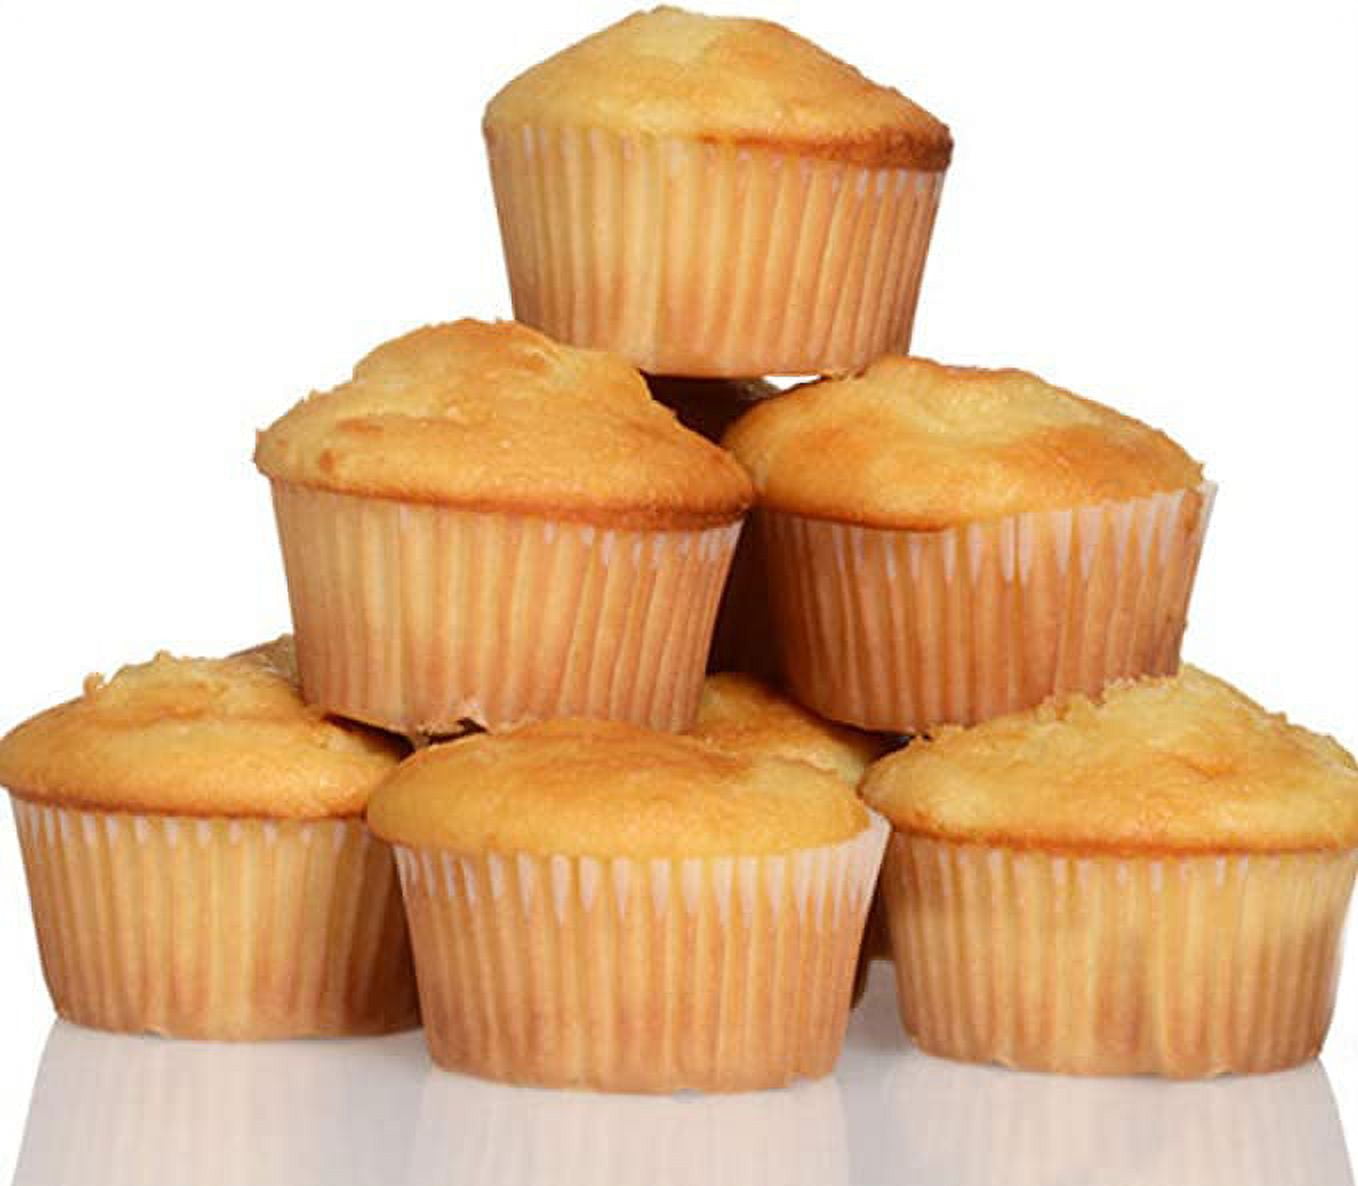 Cupcake Liners – Solid